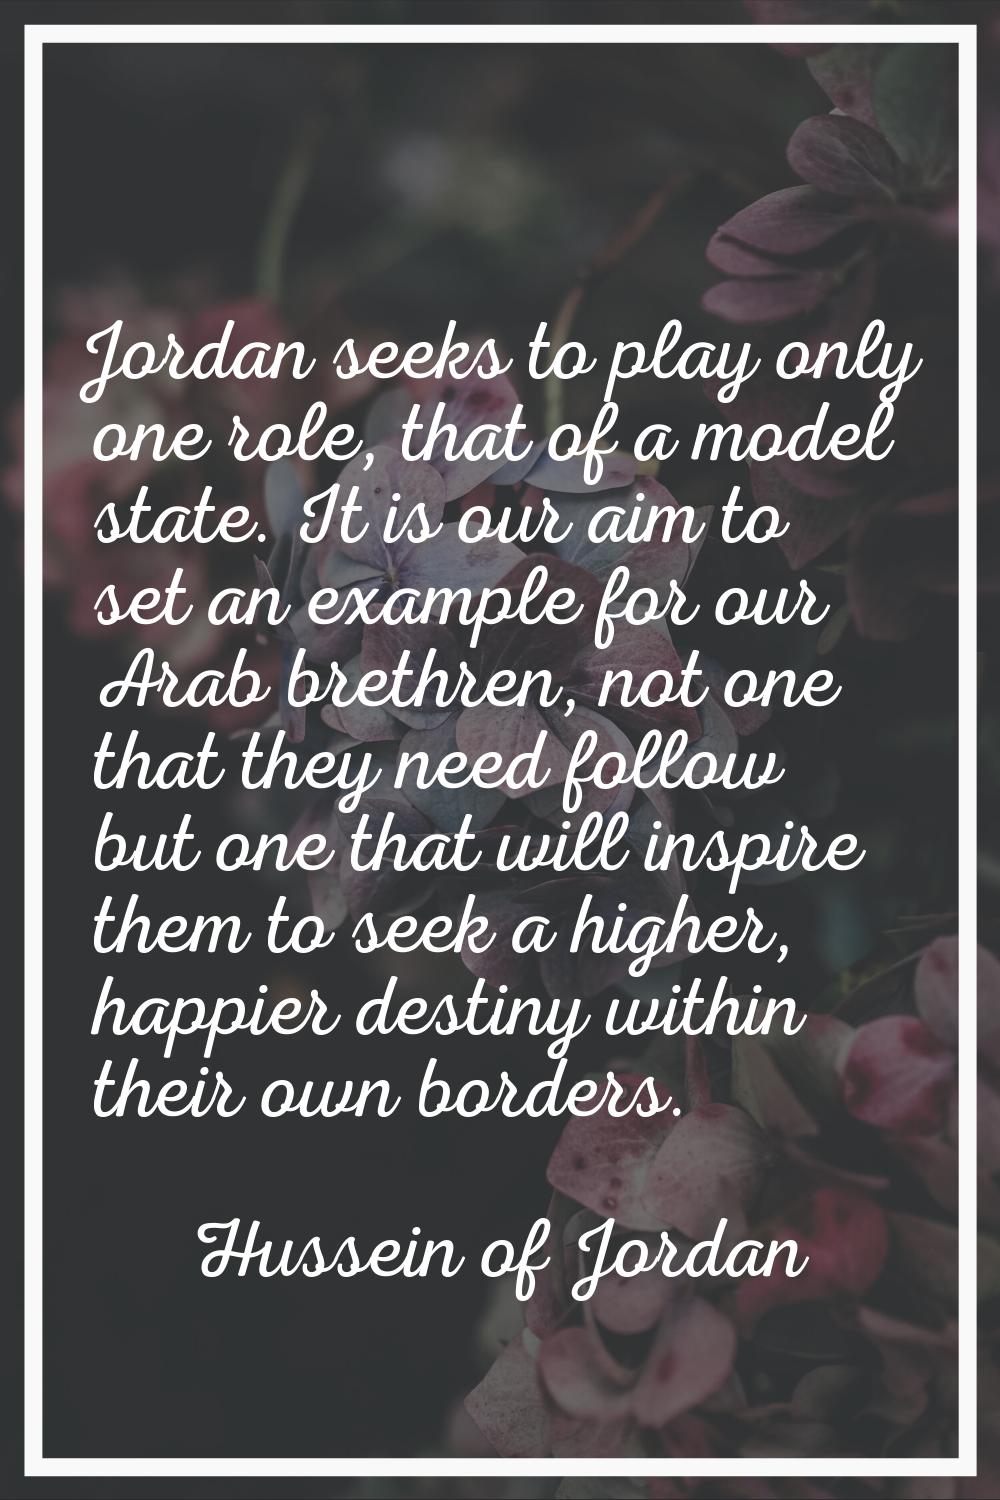 Jordan seeks to play only one role, that of a model state. It is our aim to set an example for our 